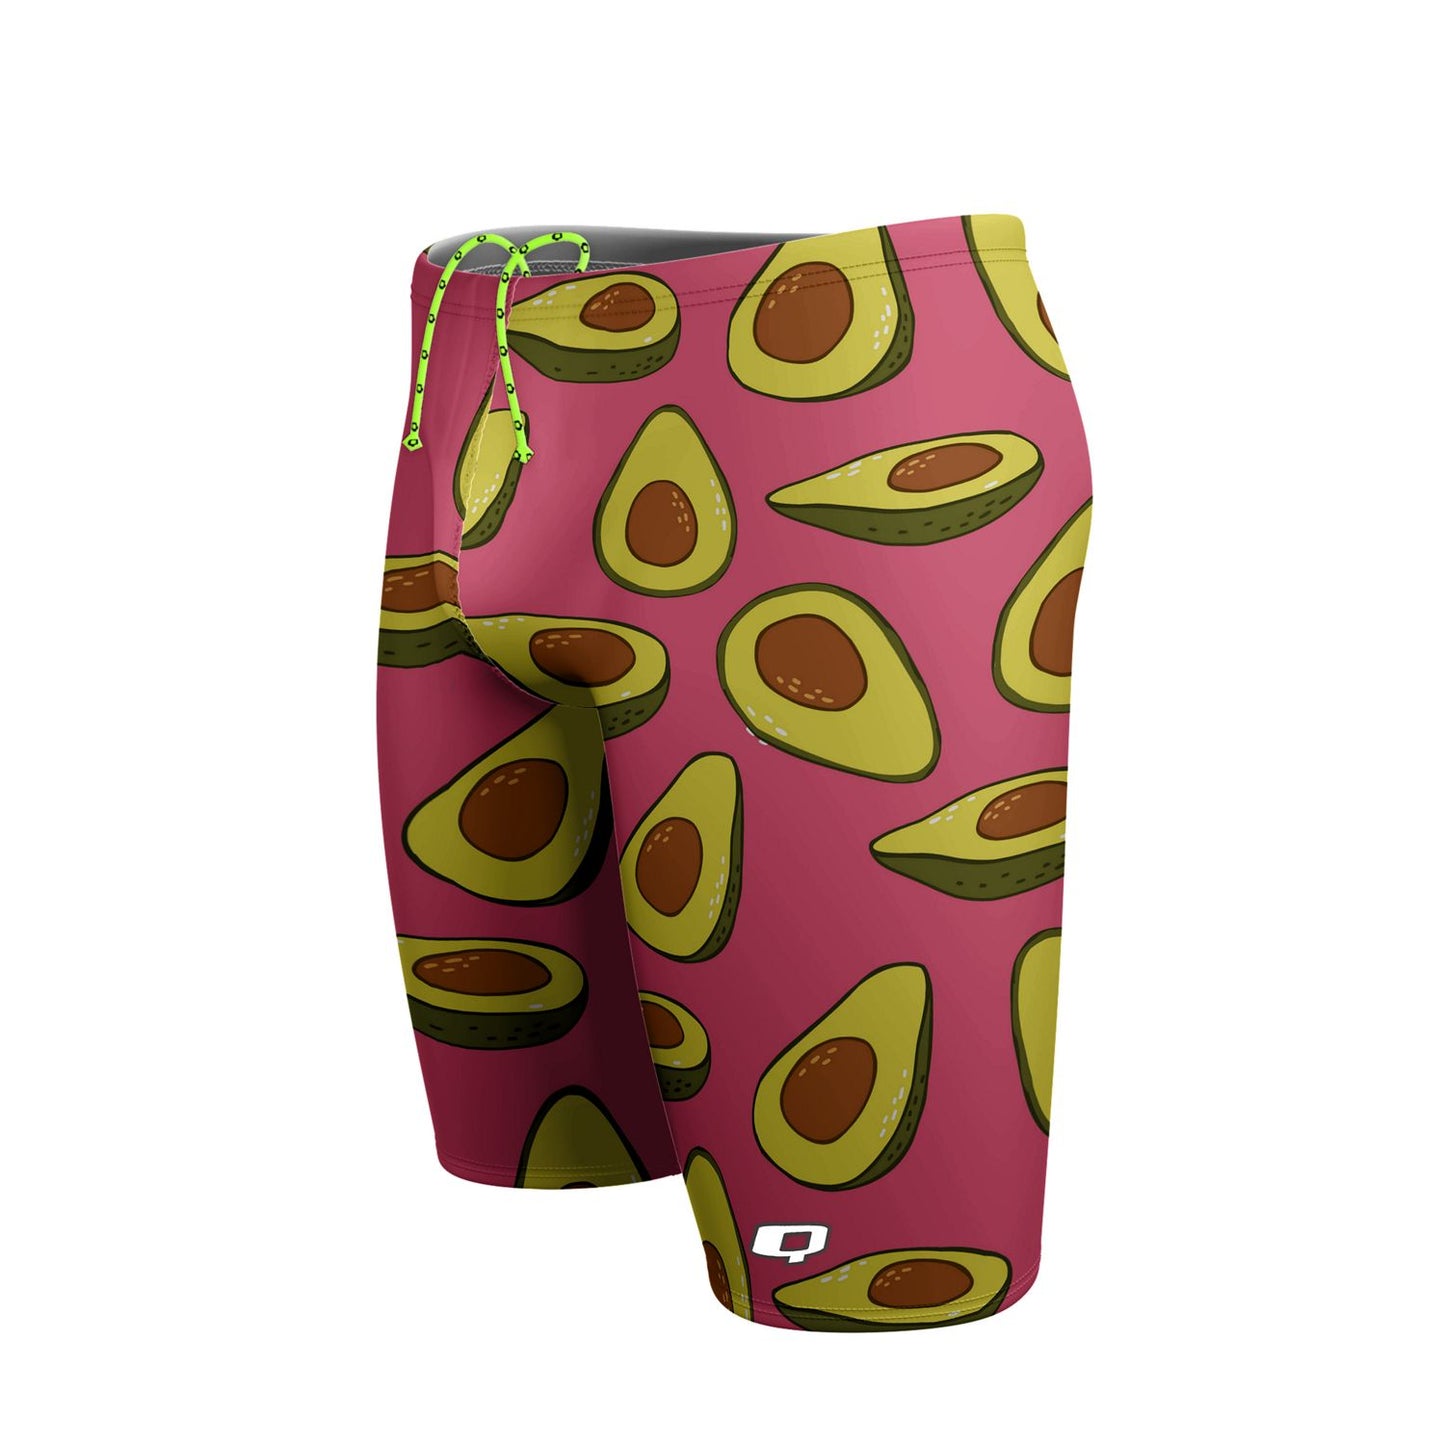 Toasted Jammer Swimsuit